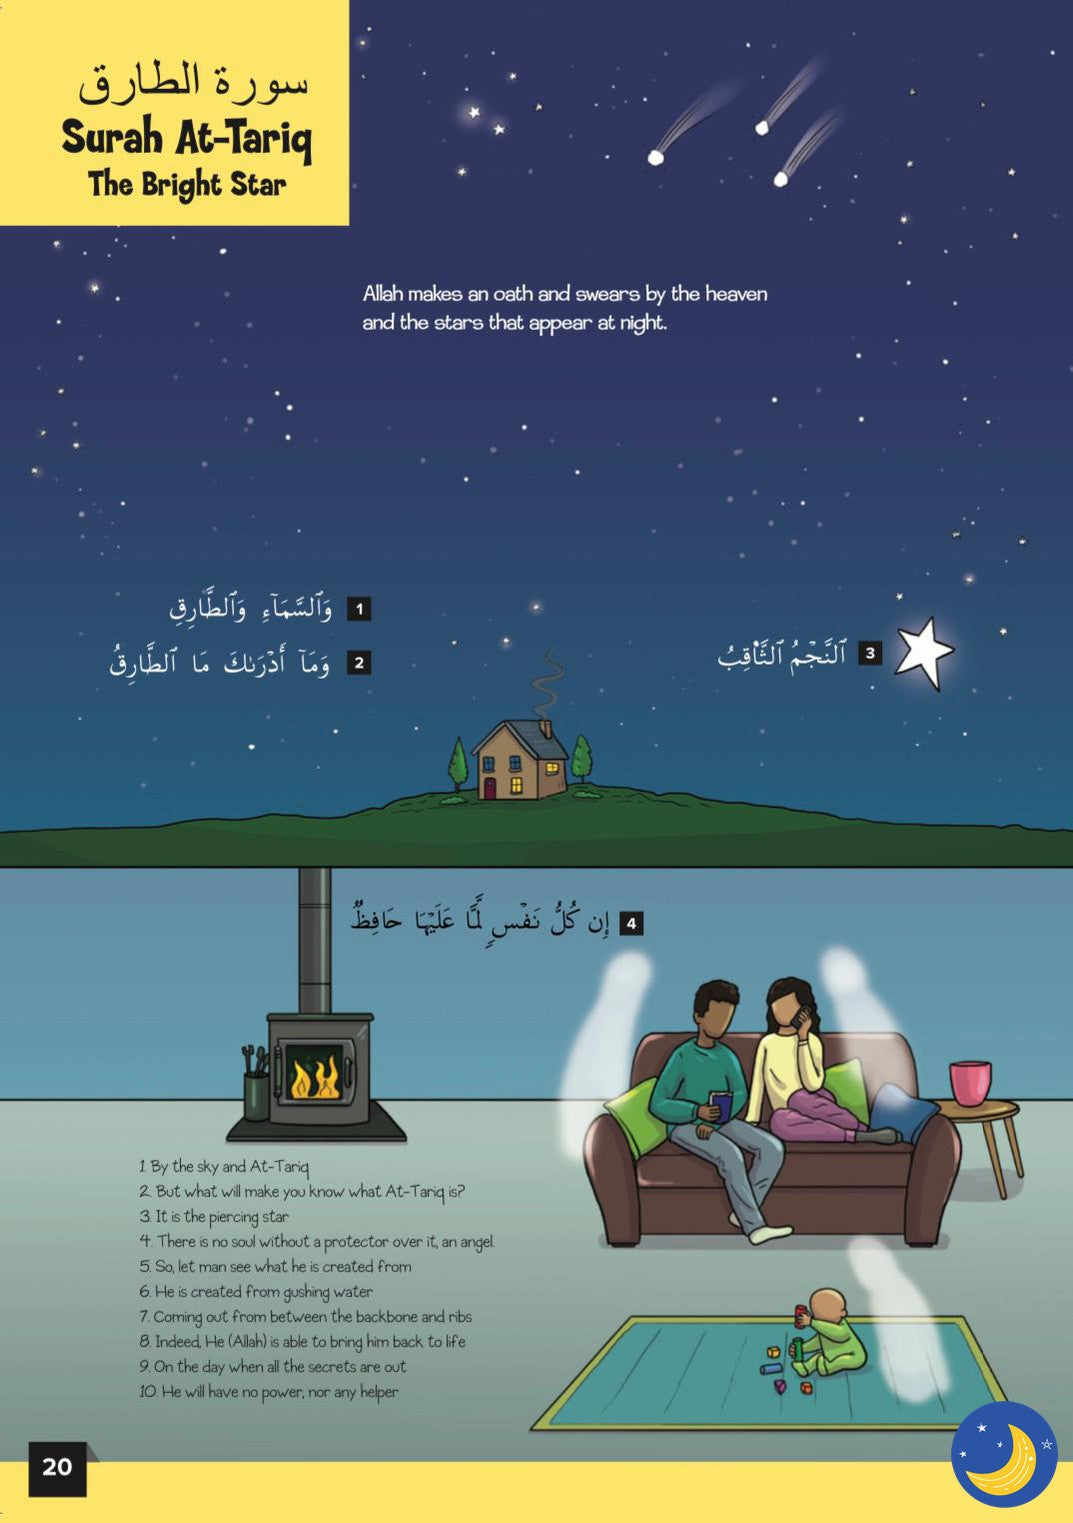 My First Quran Translation With Pictures - Juz' Amma Part 2